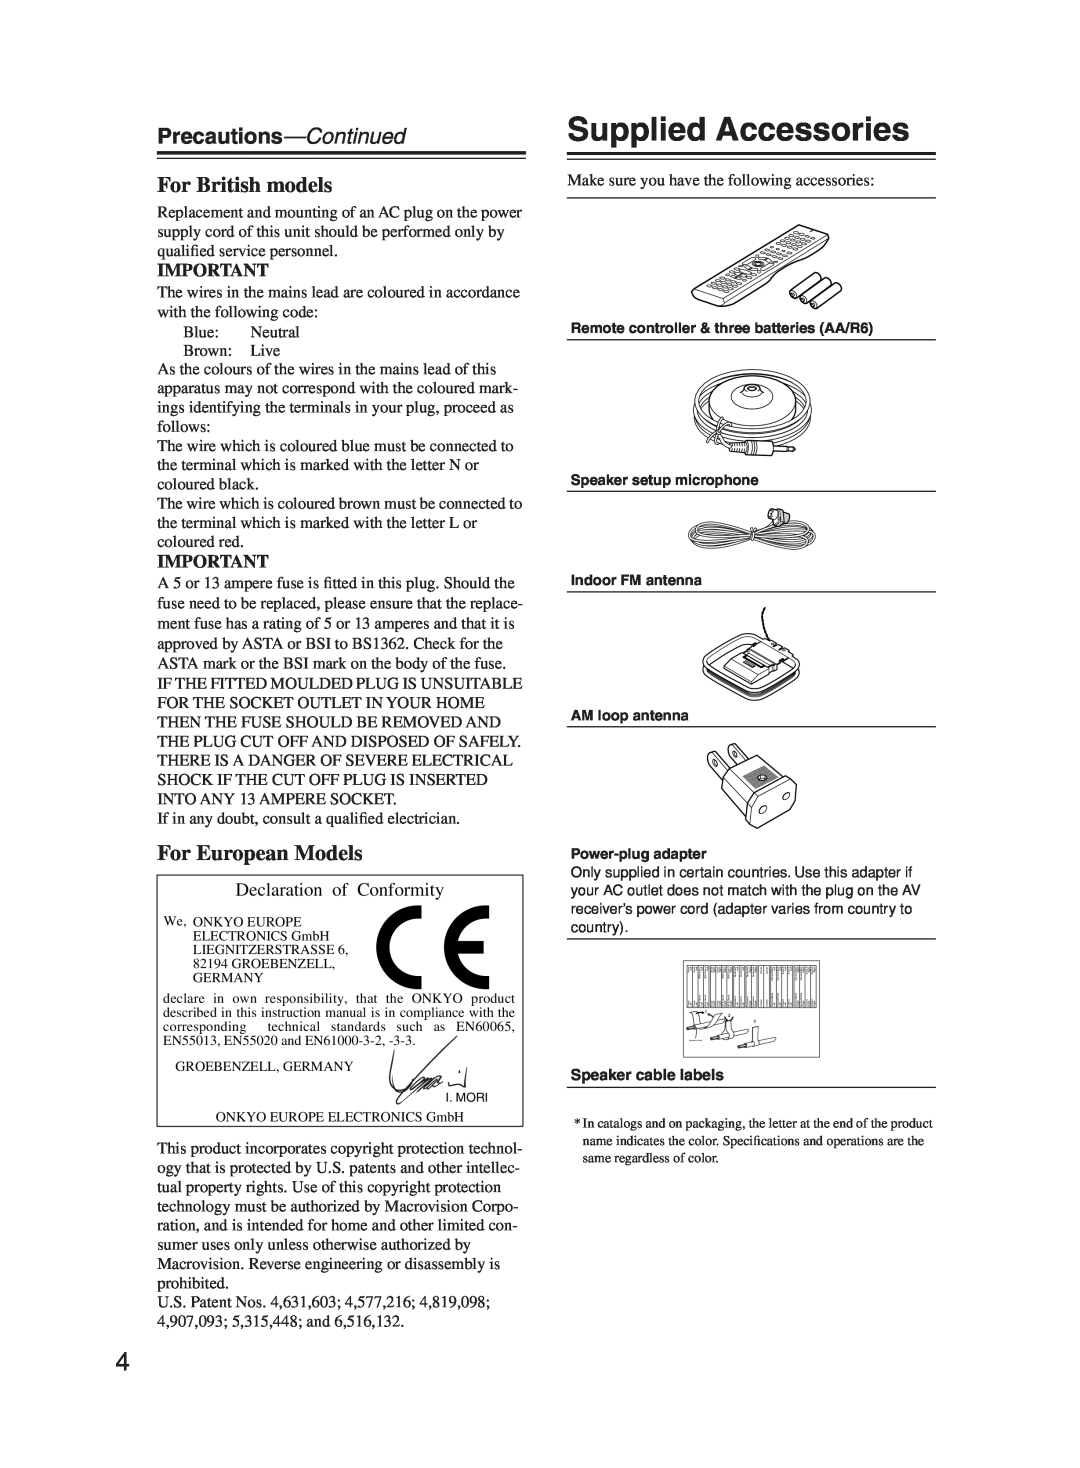 Onkyo TX-SR603X instruction manual Supplied Accessories, Precautions—Continued, For British models, For European Models 